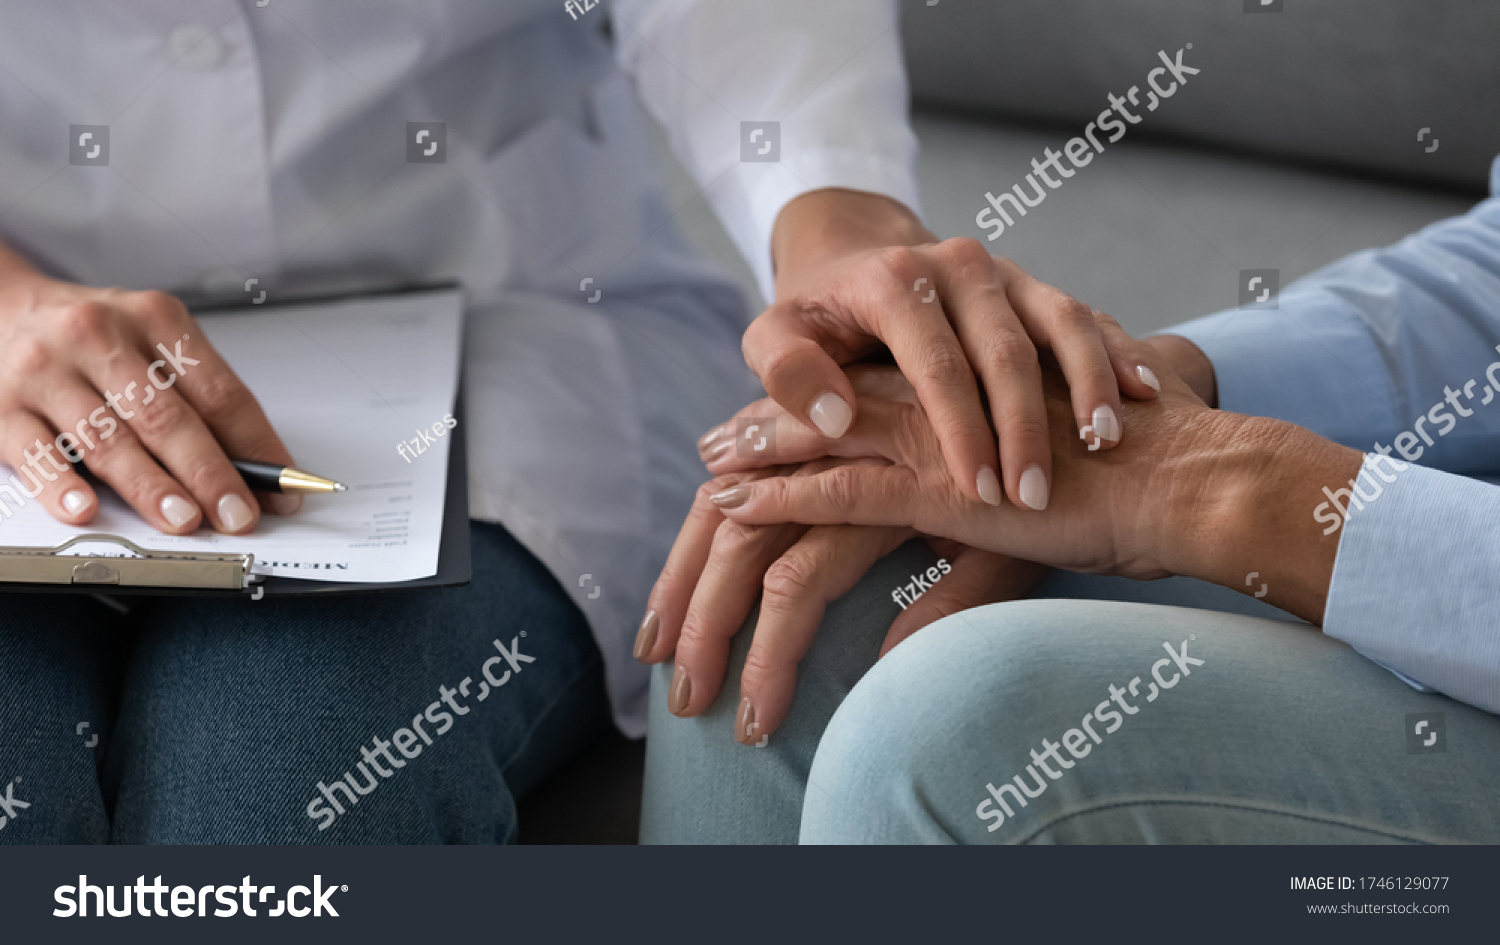 Seated on couch social service homecare nurse worker in white coat supports old patient hold hand encourages her close up, cancer diagnose, overcome illness, psychological help express empathy concept #1746129077